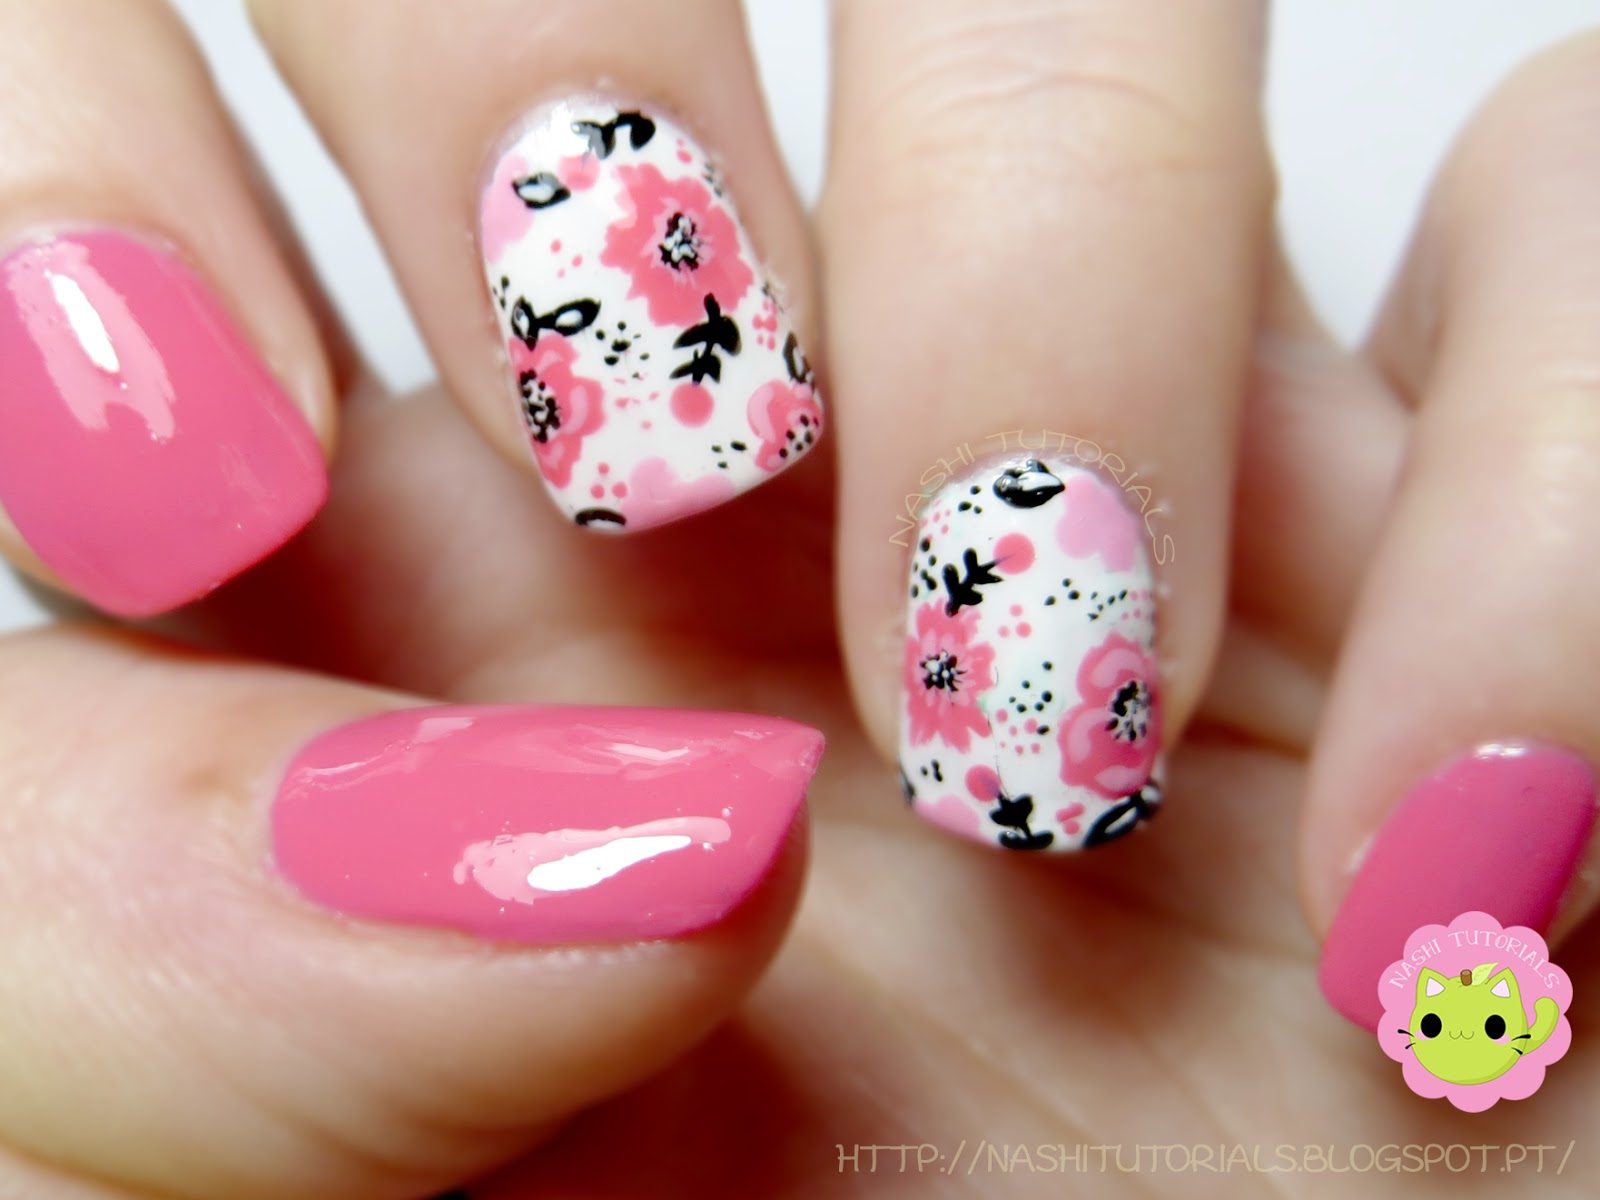 5. Spring Floral Nail Art for Beginners - wide 7